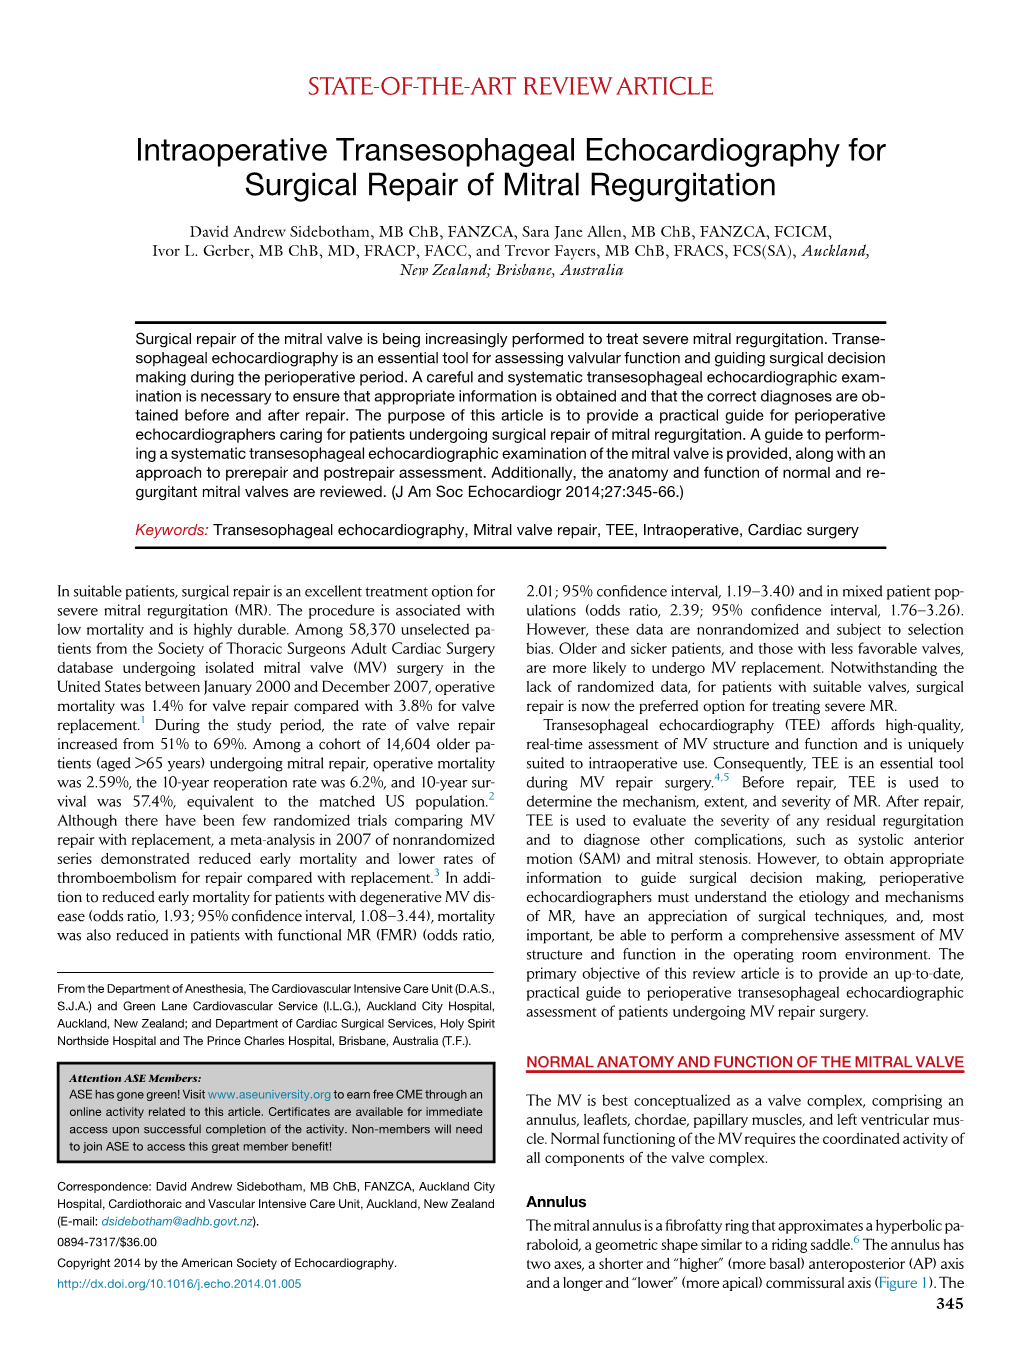 Intraoperative Transesophageal Echocardiography for Surgical Repair of Mitral Regurgitation